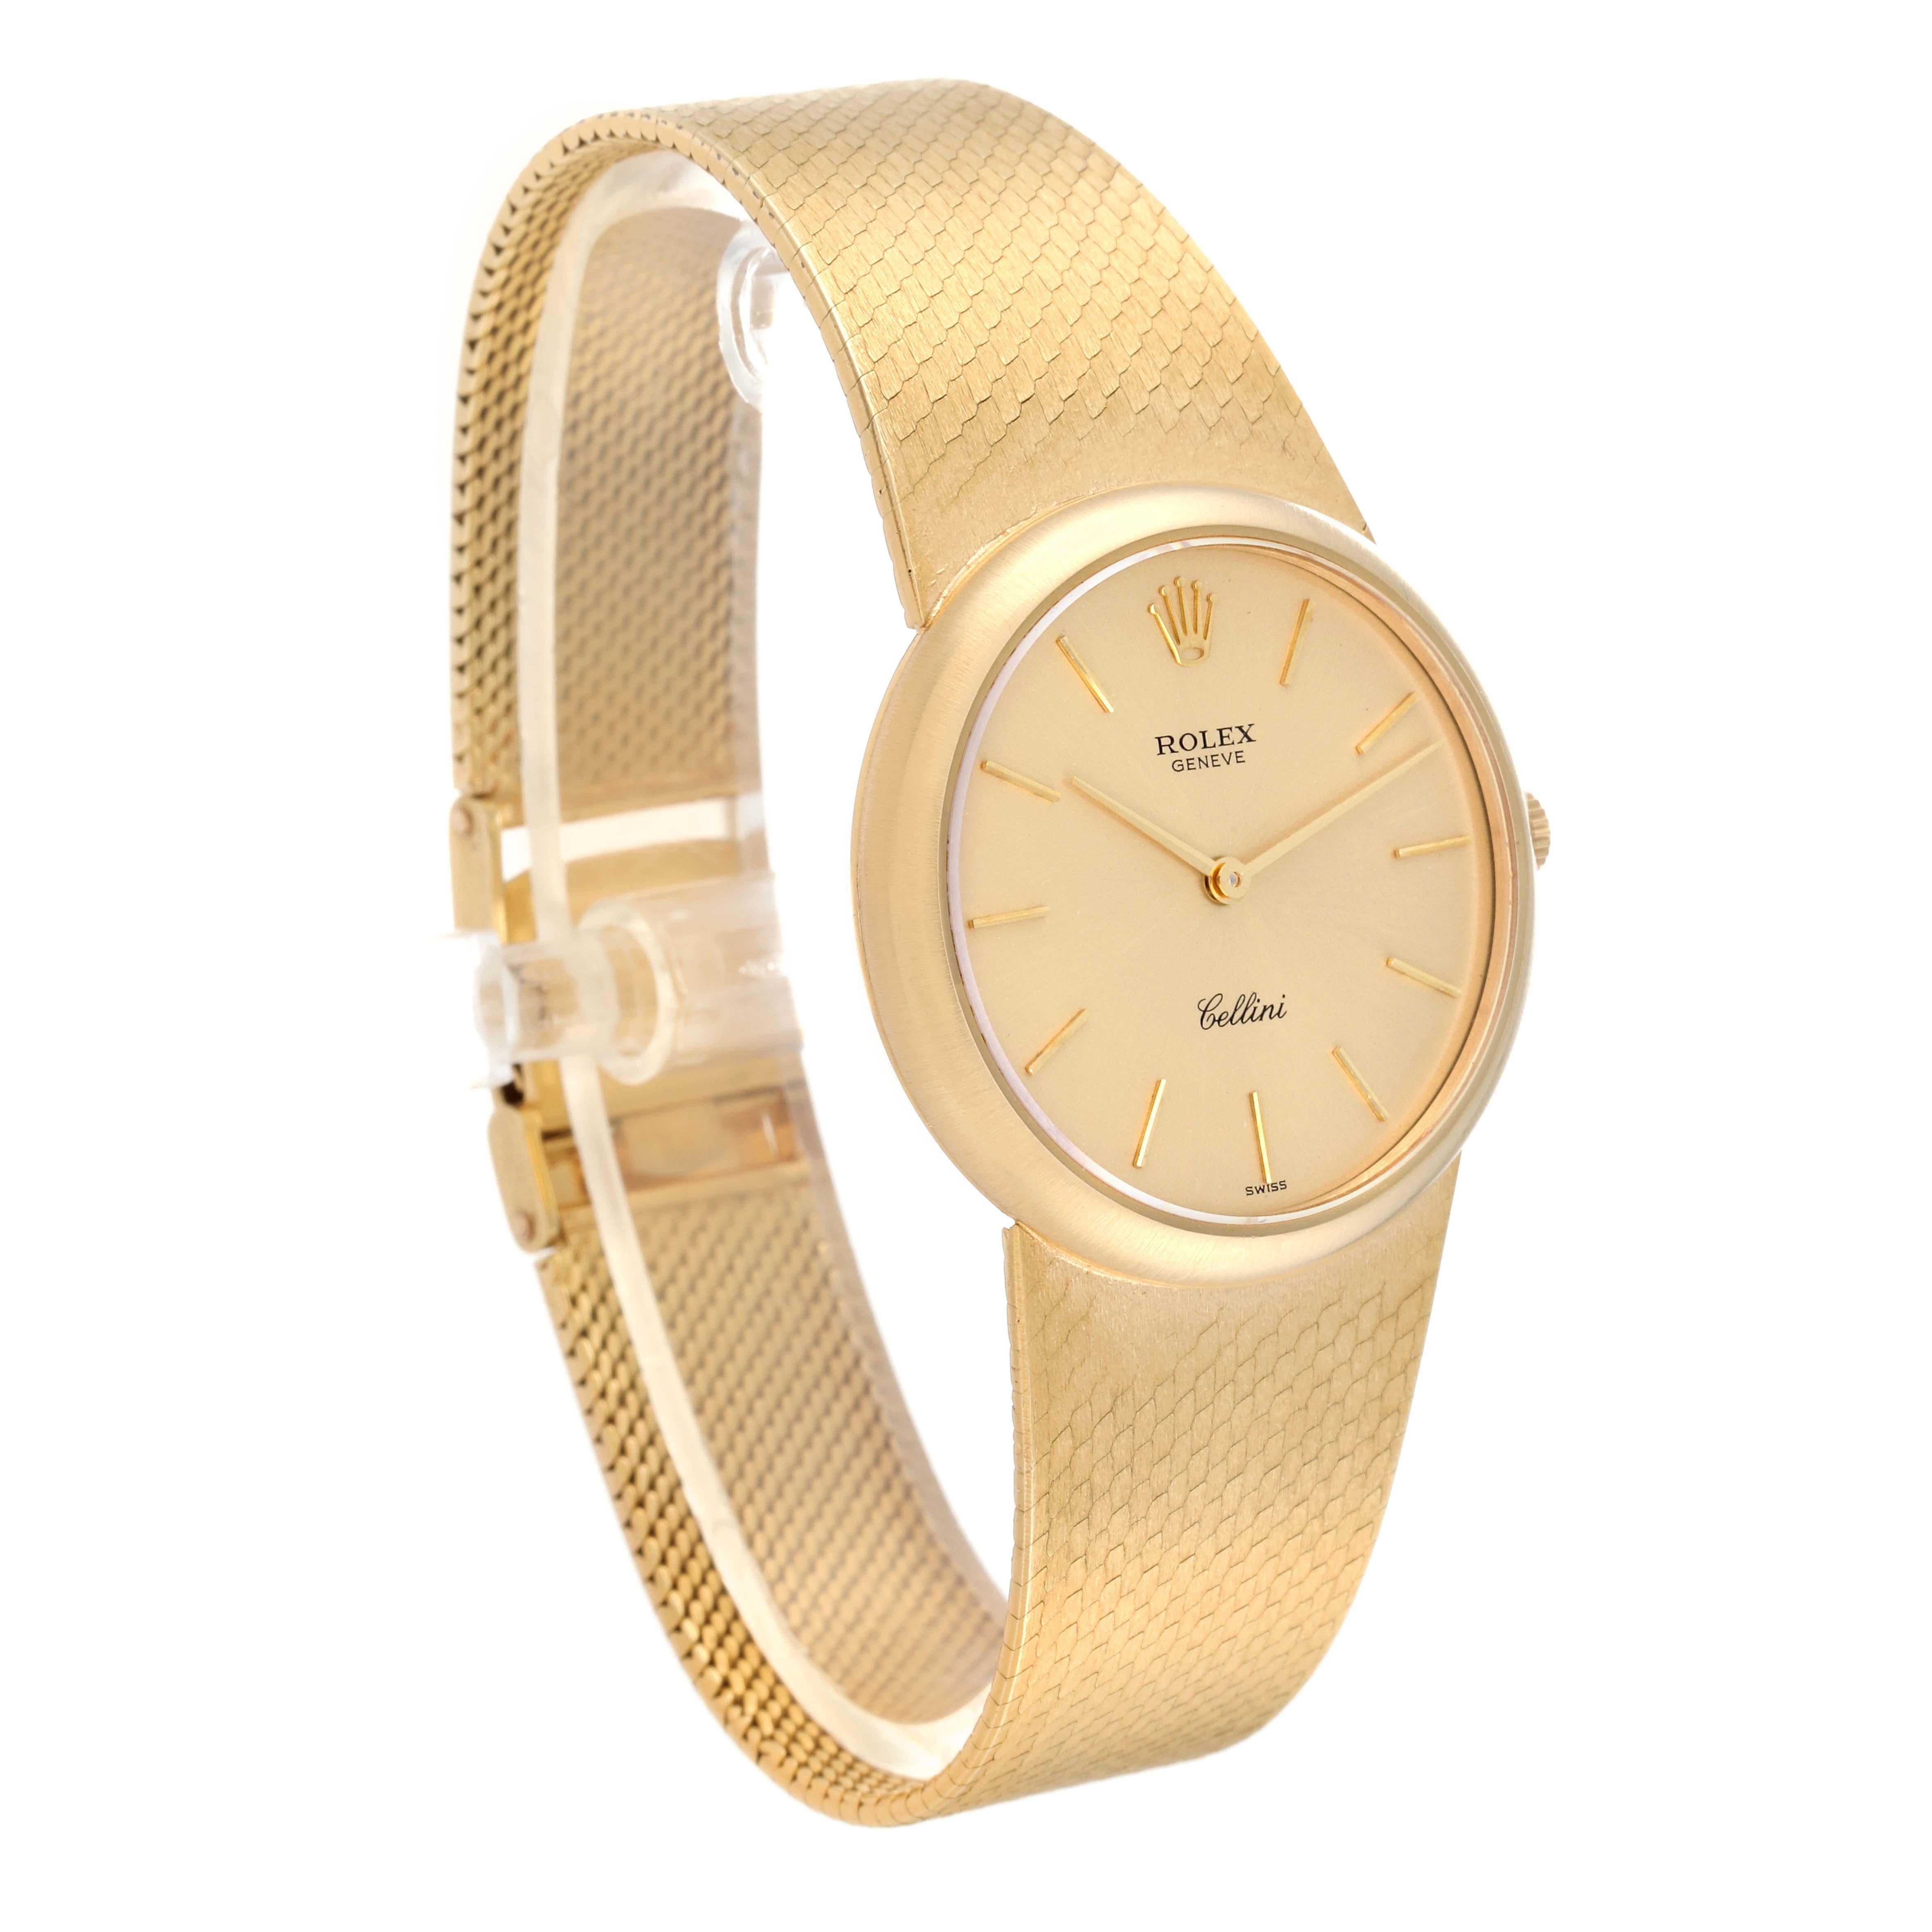 Rolex Cellini Yellow Gold Vintage Ladies Watch 653 For Sale 3